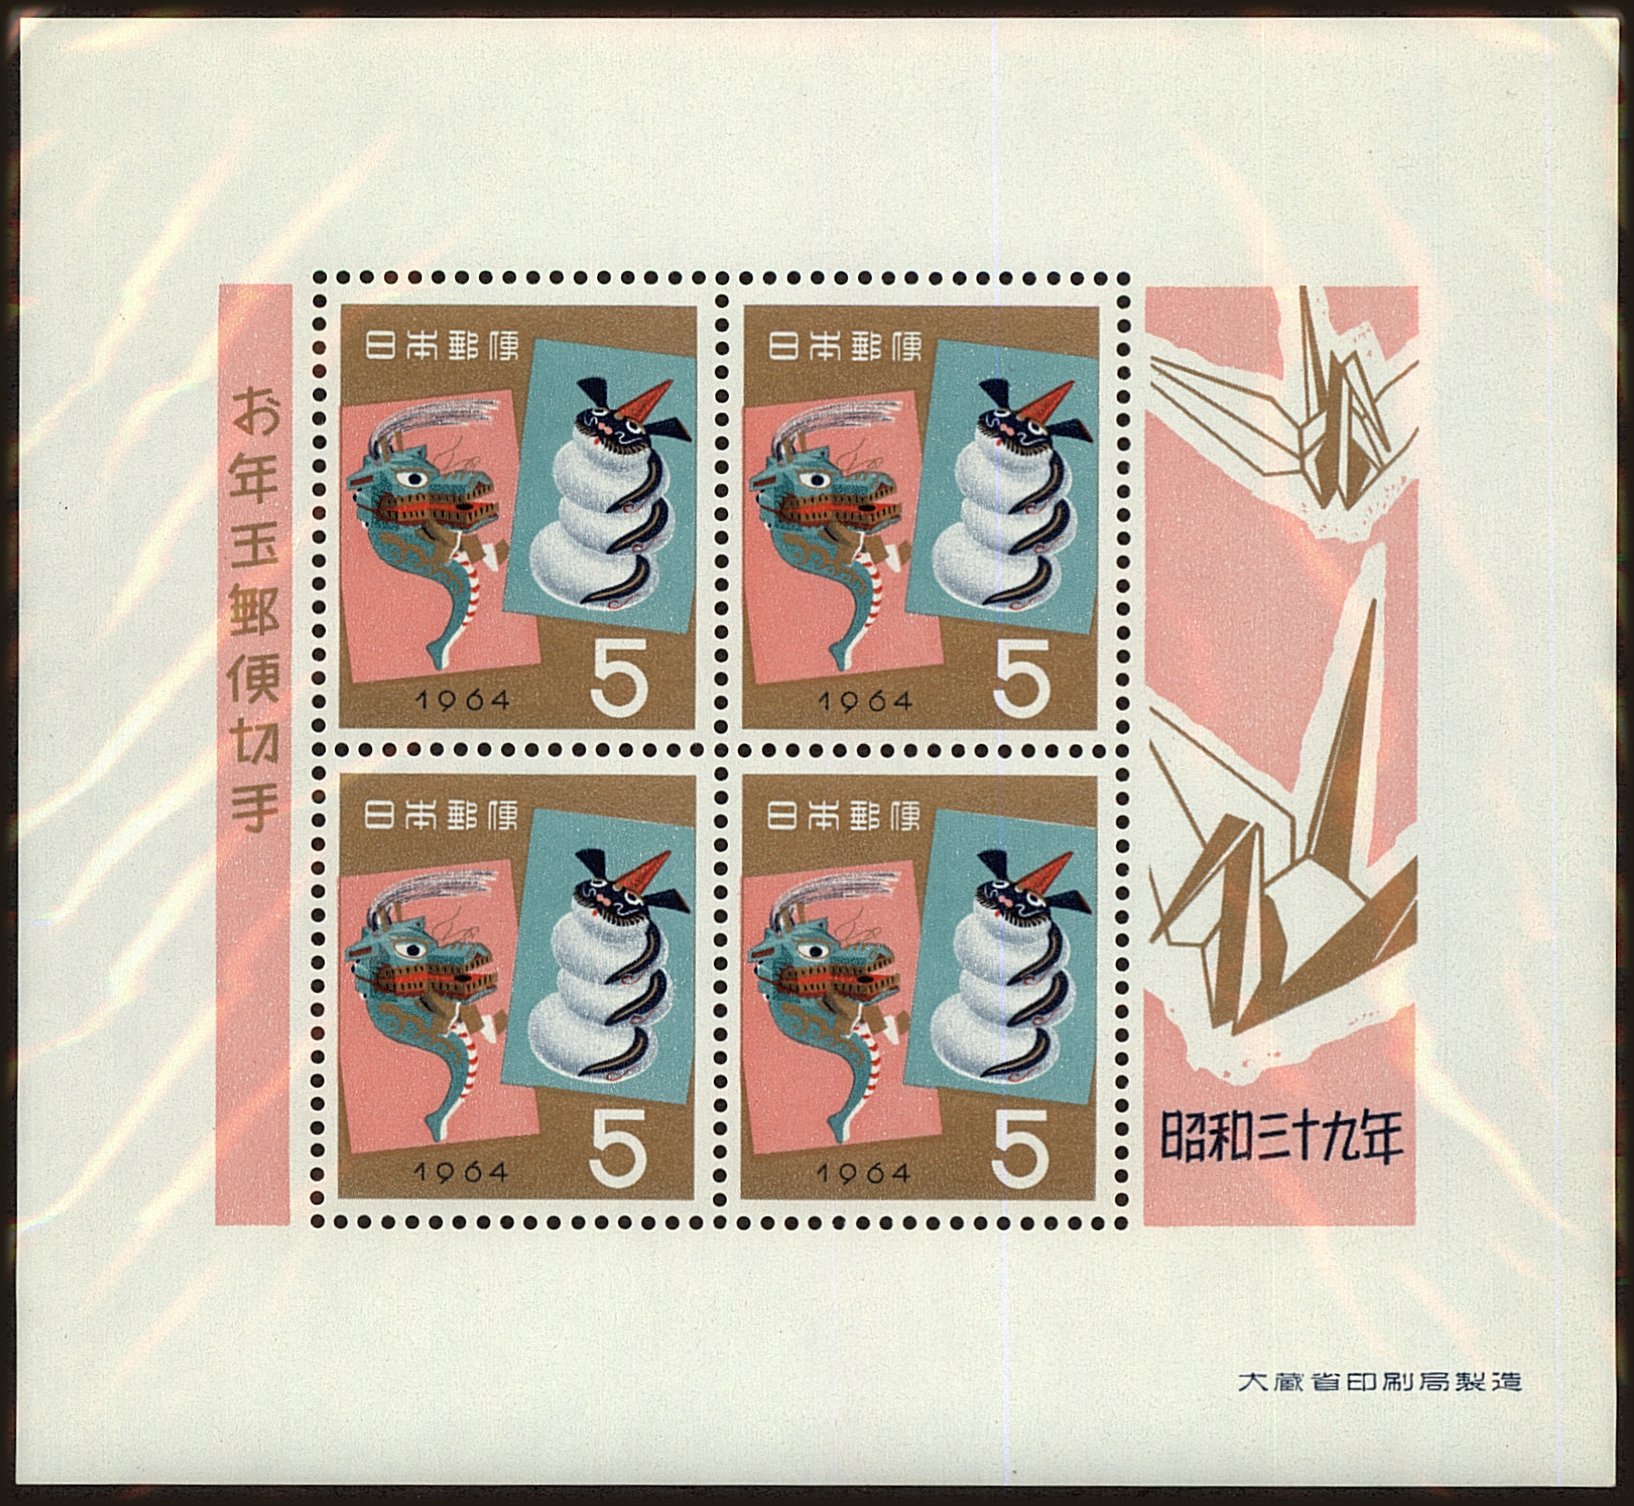 Front view of Japan 805 collectors stamp